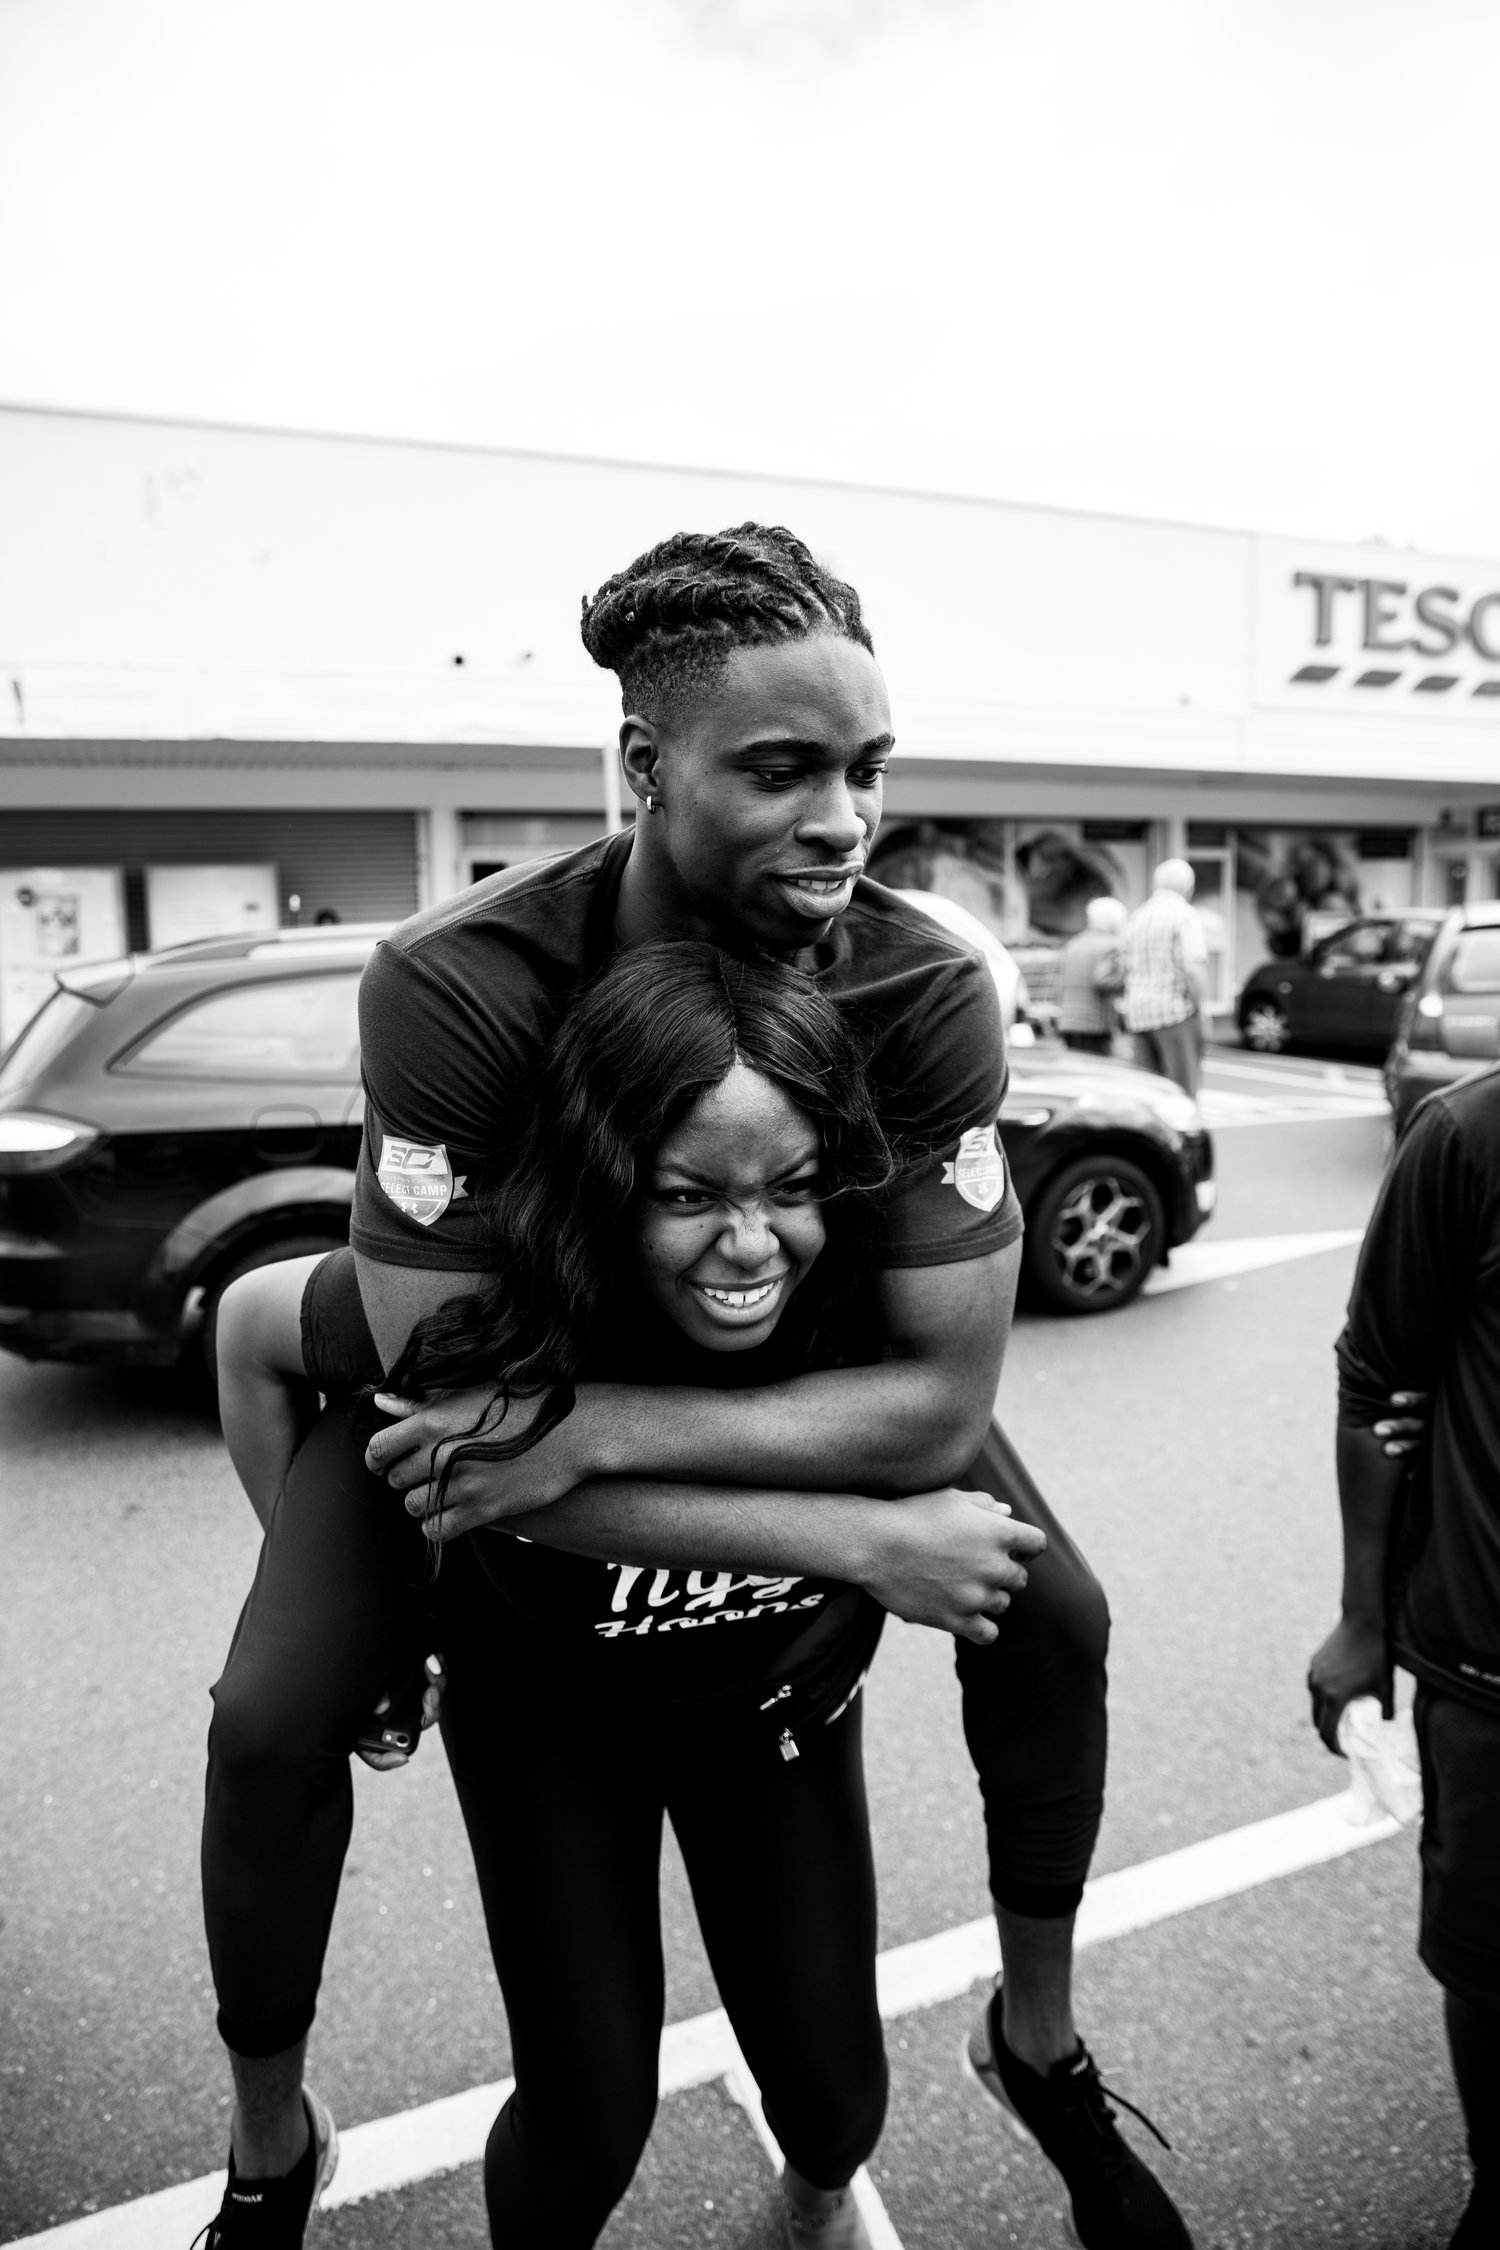 Aidan's cousin carries him on her back in the parking lot of a Tesco in Johnnie Izquierdo's black and white photo